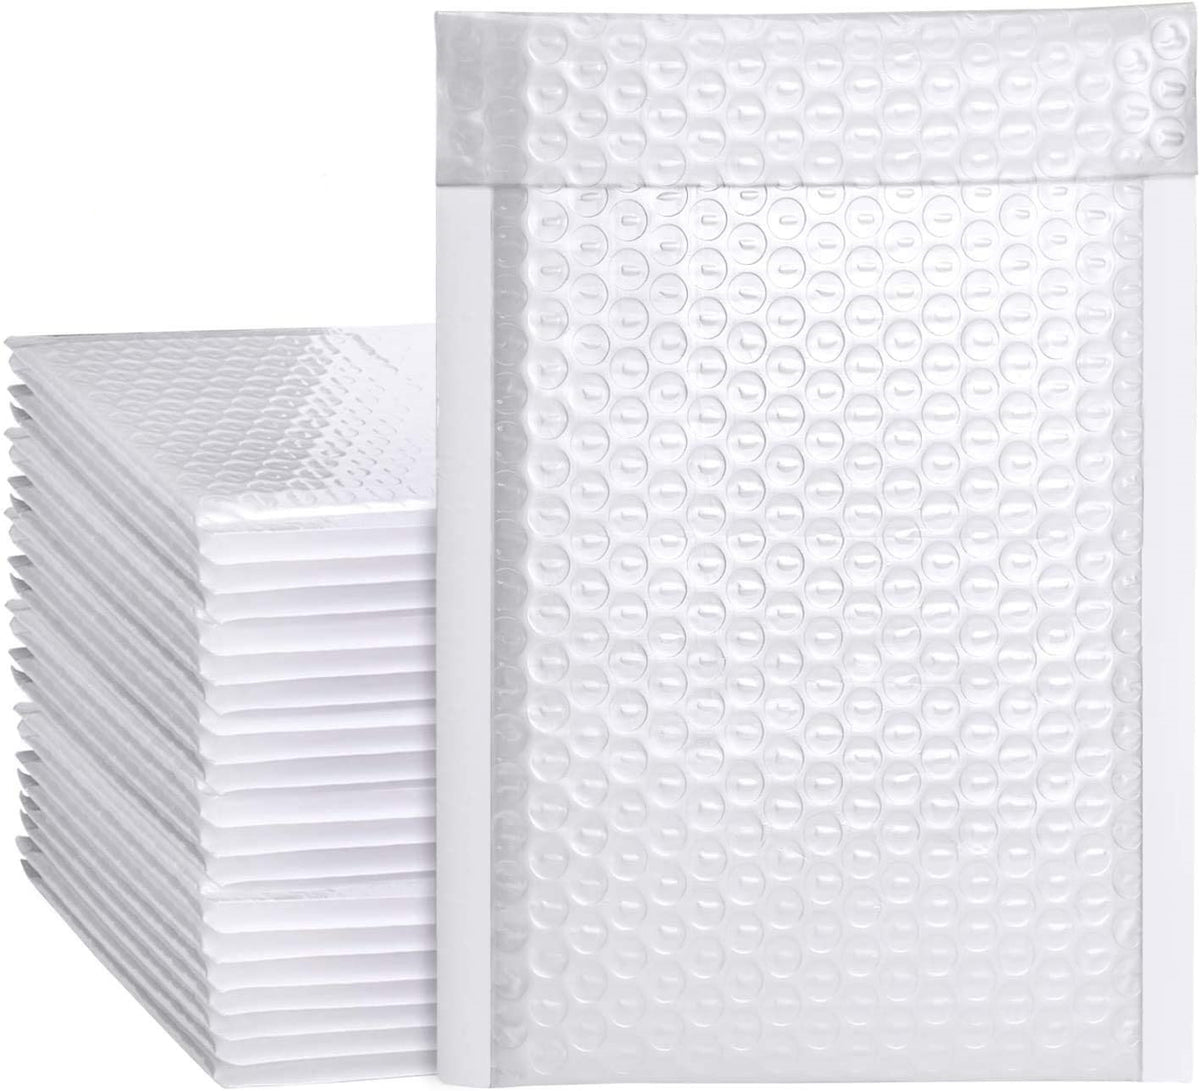 Fuxury Bubble Mailer White, 100 Pack 6x10 Bubble Mailers,Self Seal  Waterproof Mailing Envelopes, Bubble Padded Envelopes, Shipping Bags for